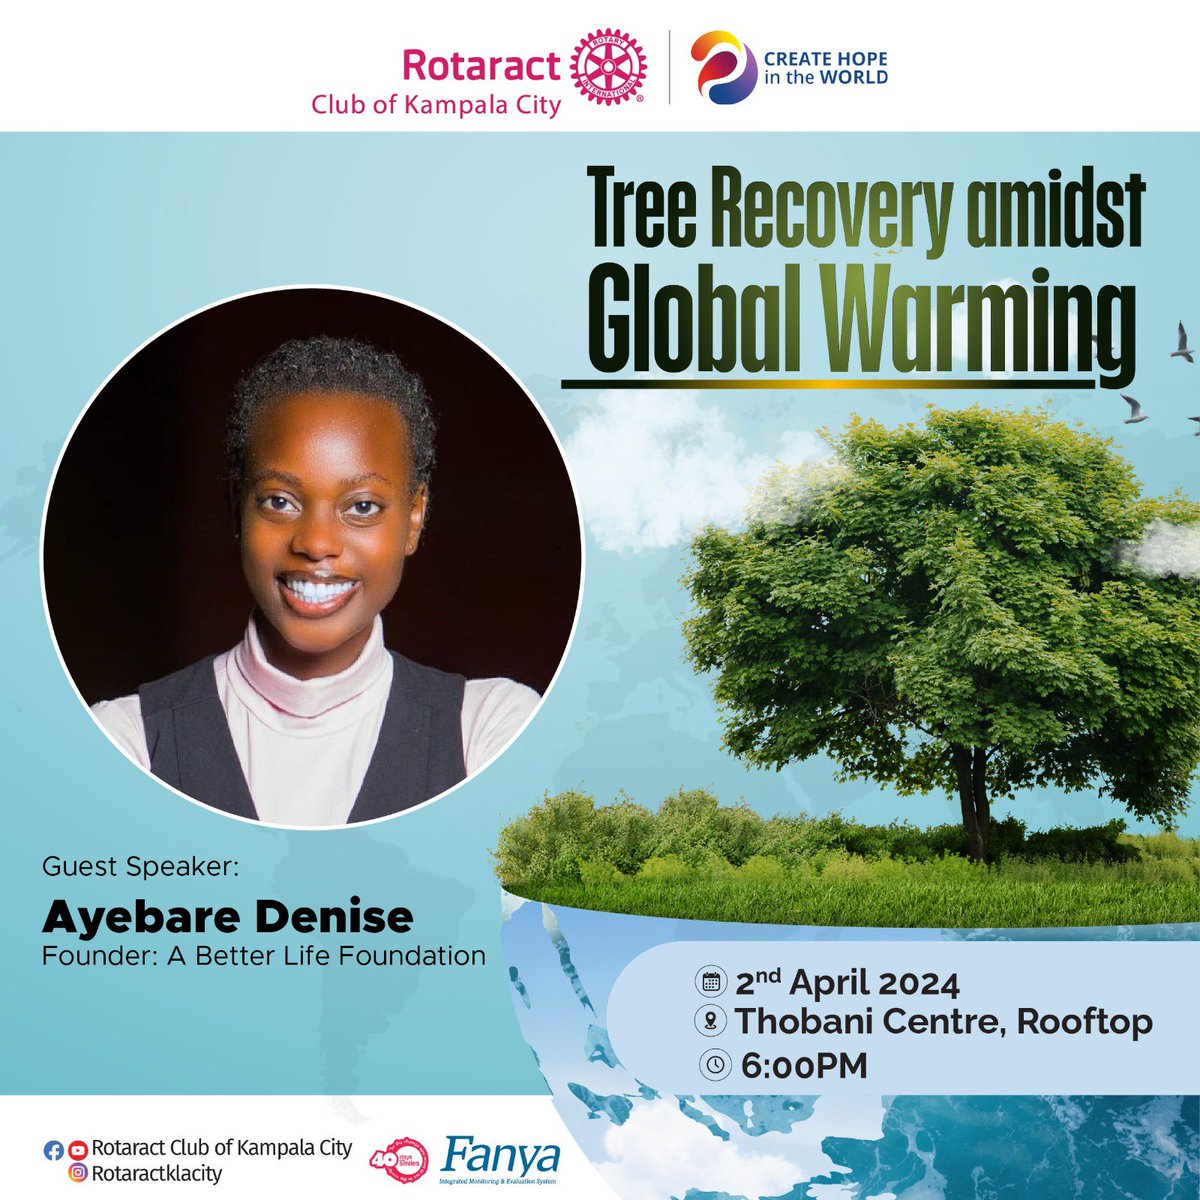 Branching out for change? Join us for fellowship today on “Tree Recovery Amidst Global Warming” Together, let’s nurture hope and sow the seeds of resilience. Guest Speaker @AyebareDenise #rotaractklacity #treeplanting